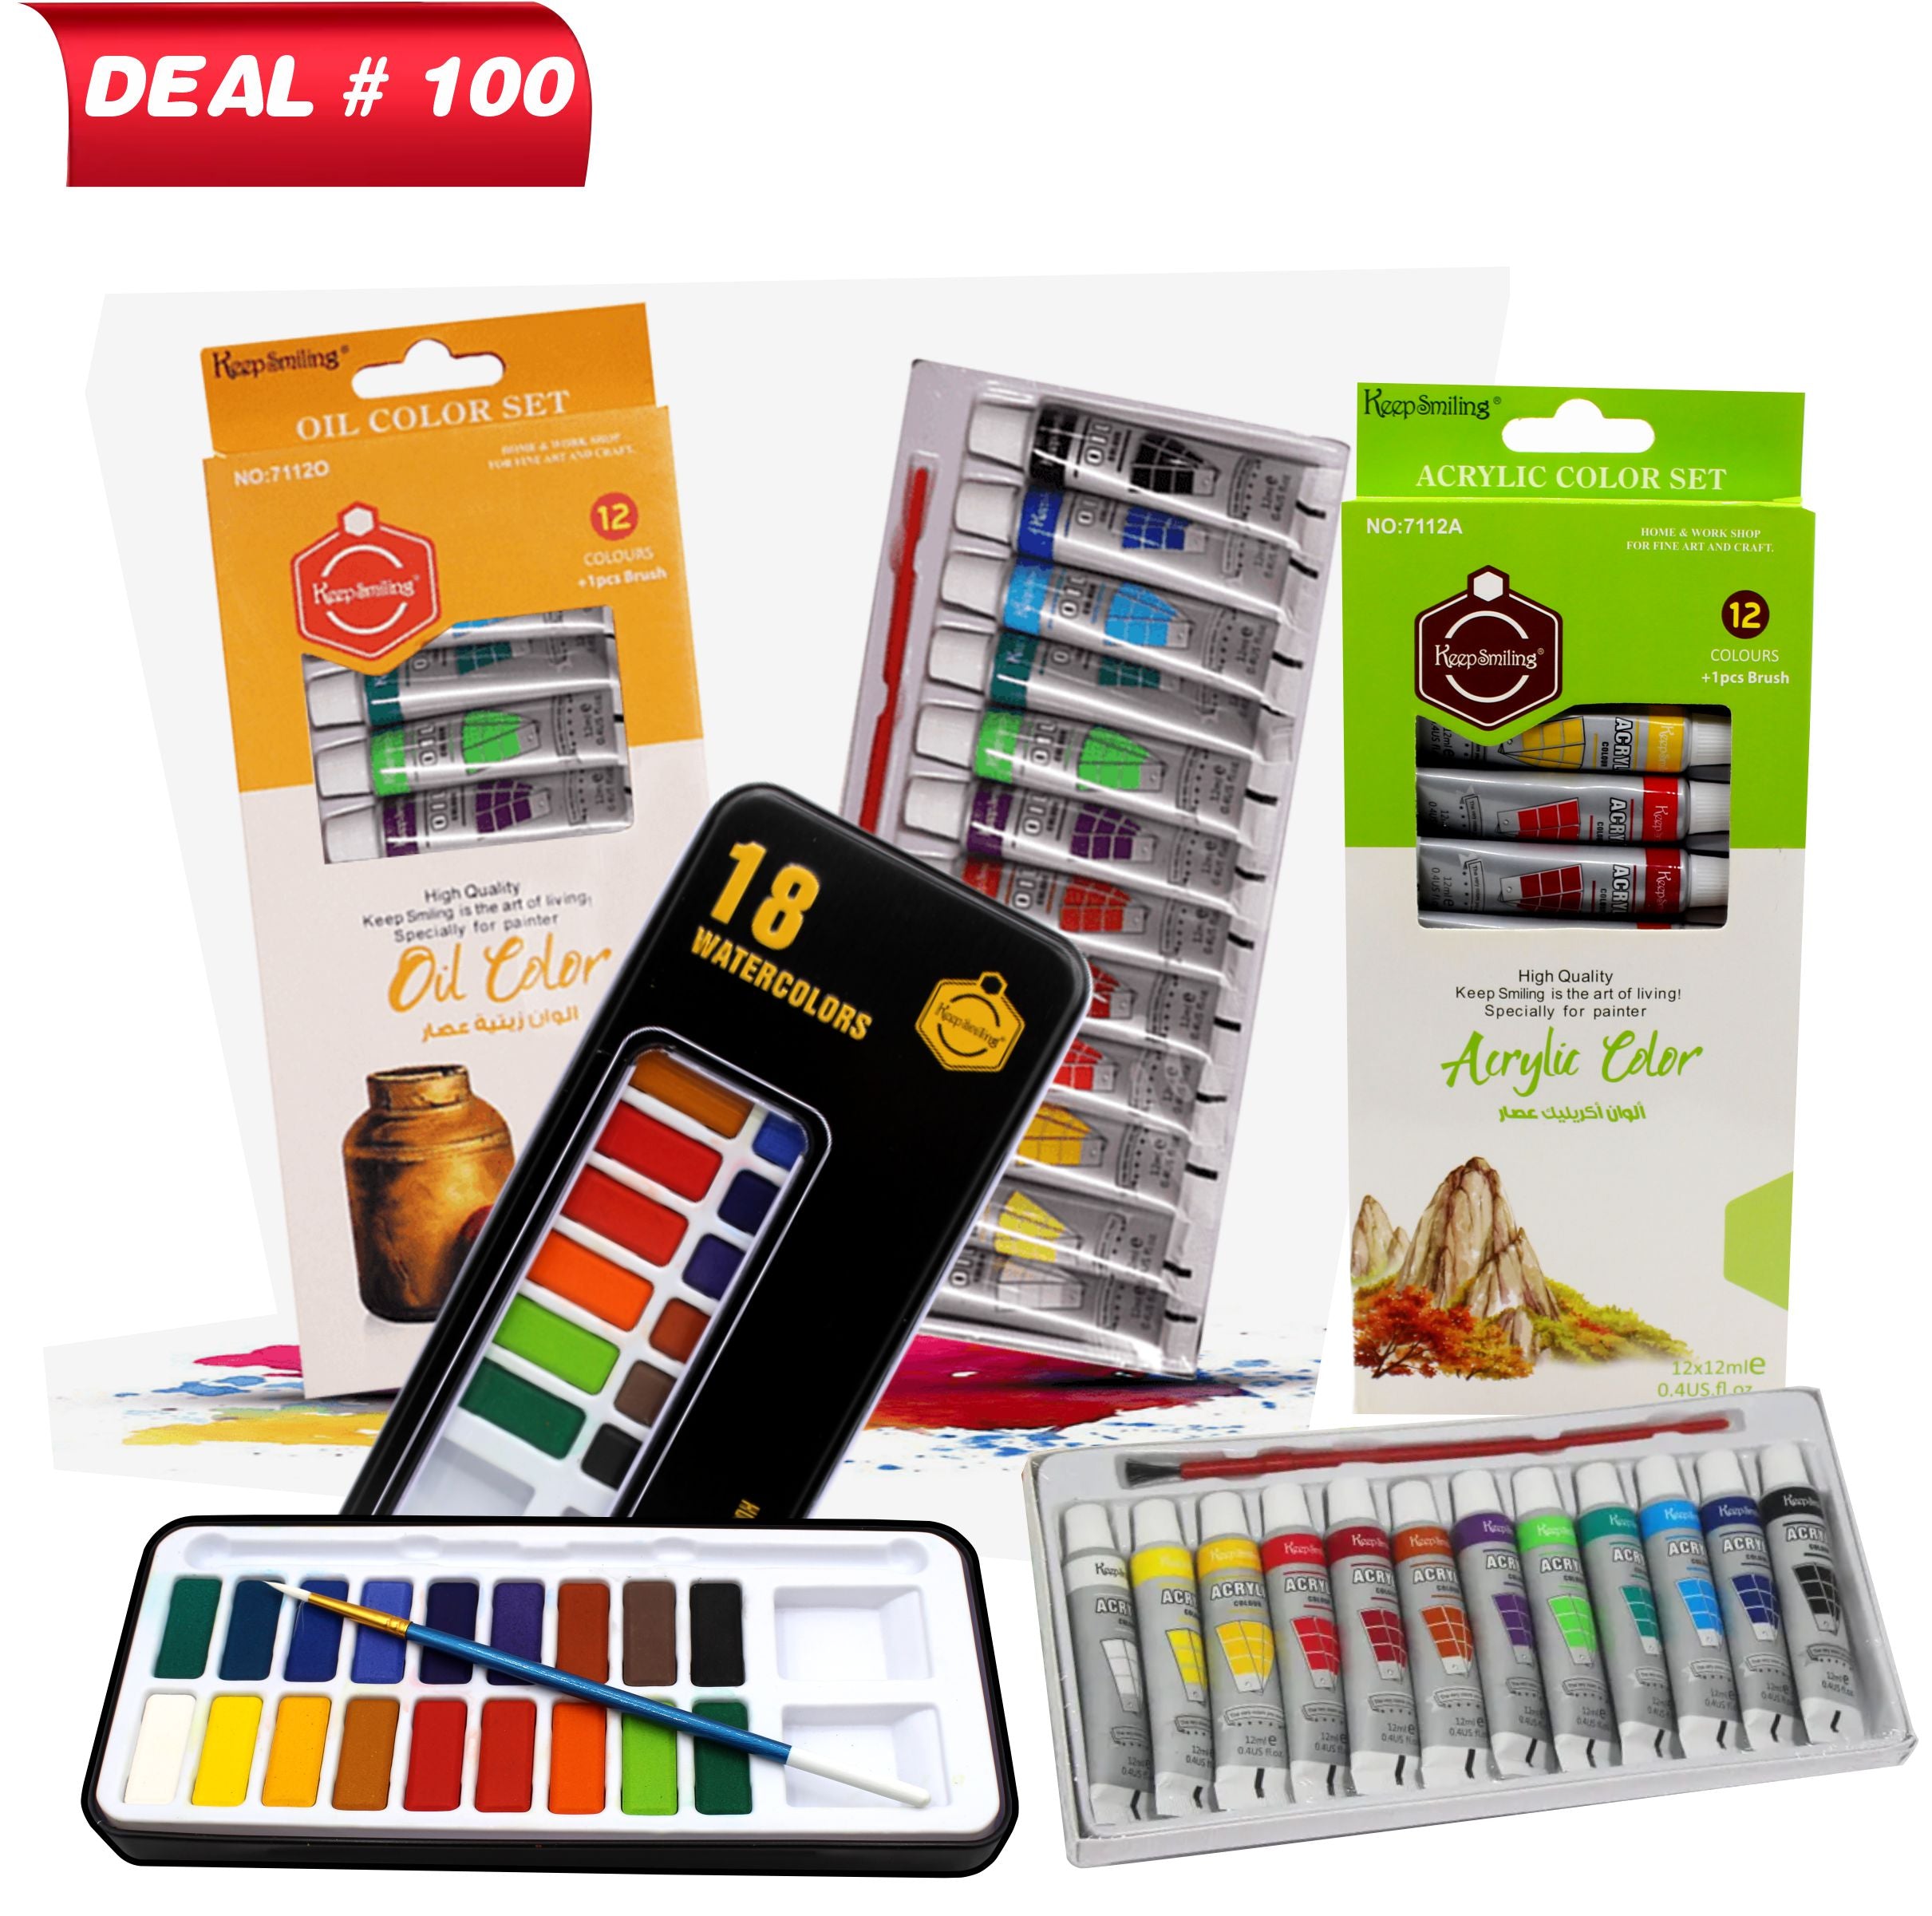 Oil & Acrylic Painting Kit For Professional Artist's, Deal No.137